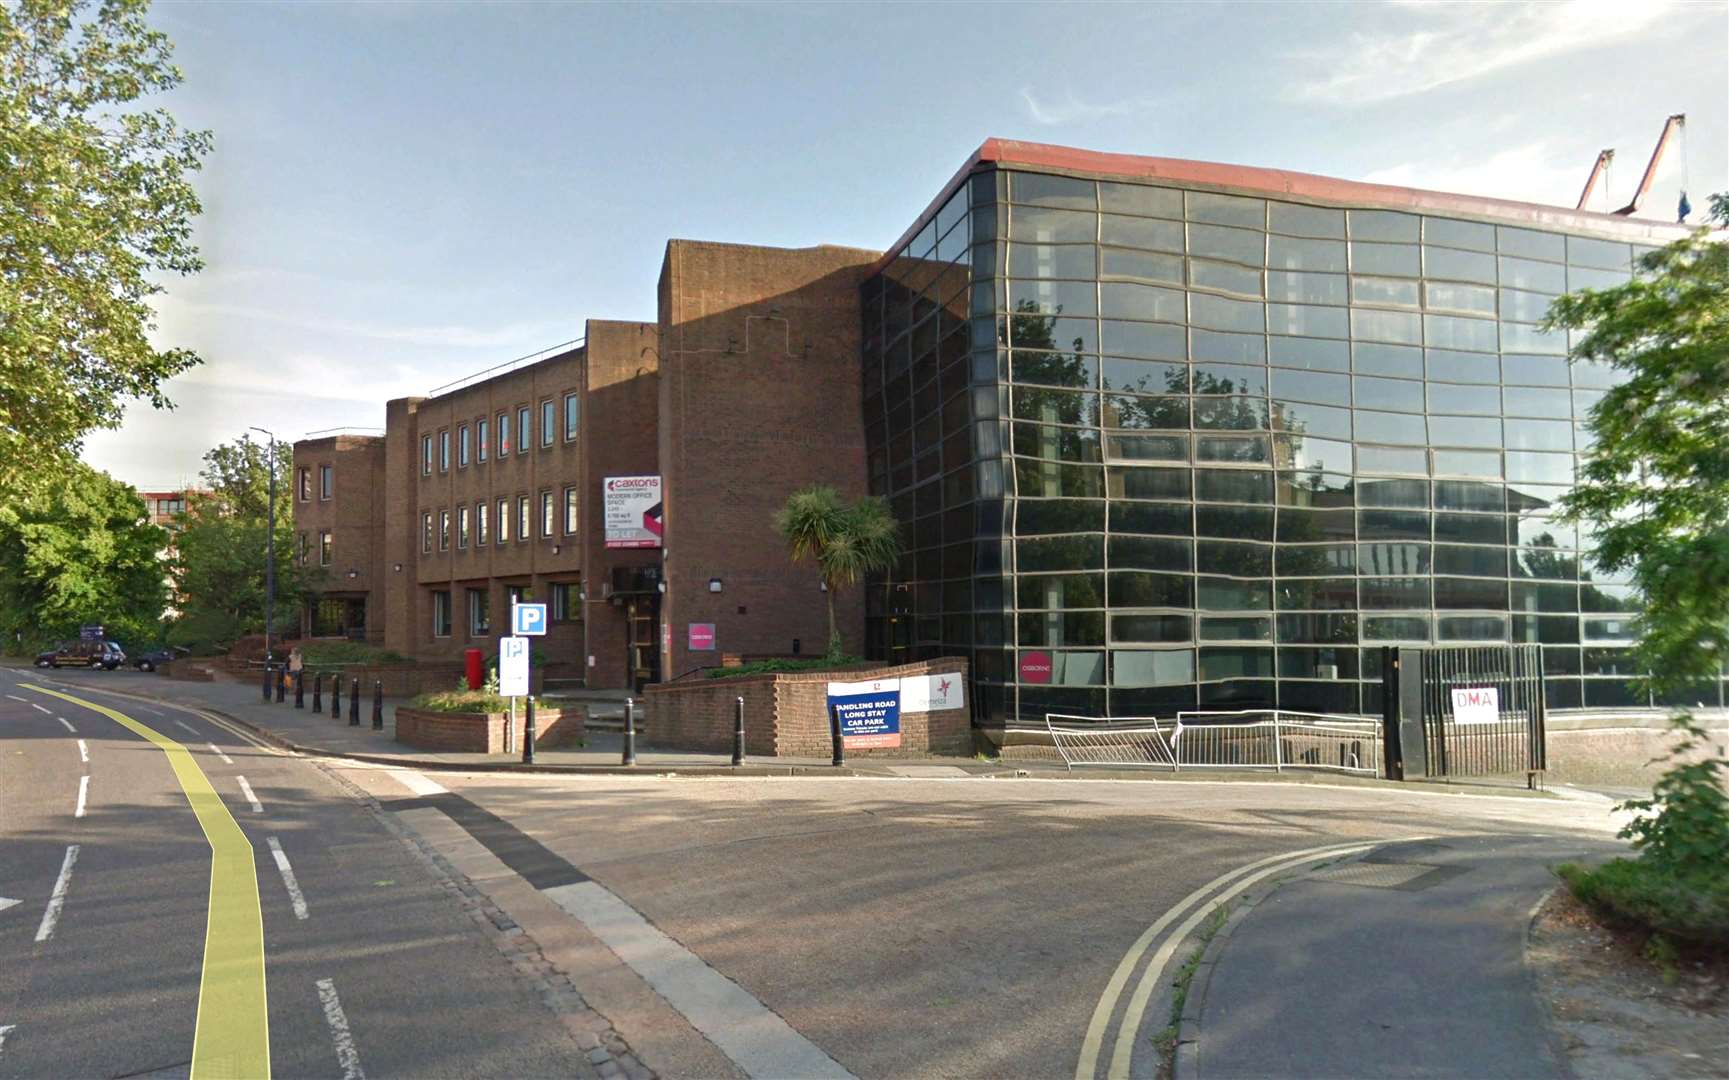 The former Royal Mail sorting office in Sandling Road, Maidstone, is earmarked for 220 homes. Google